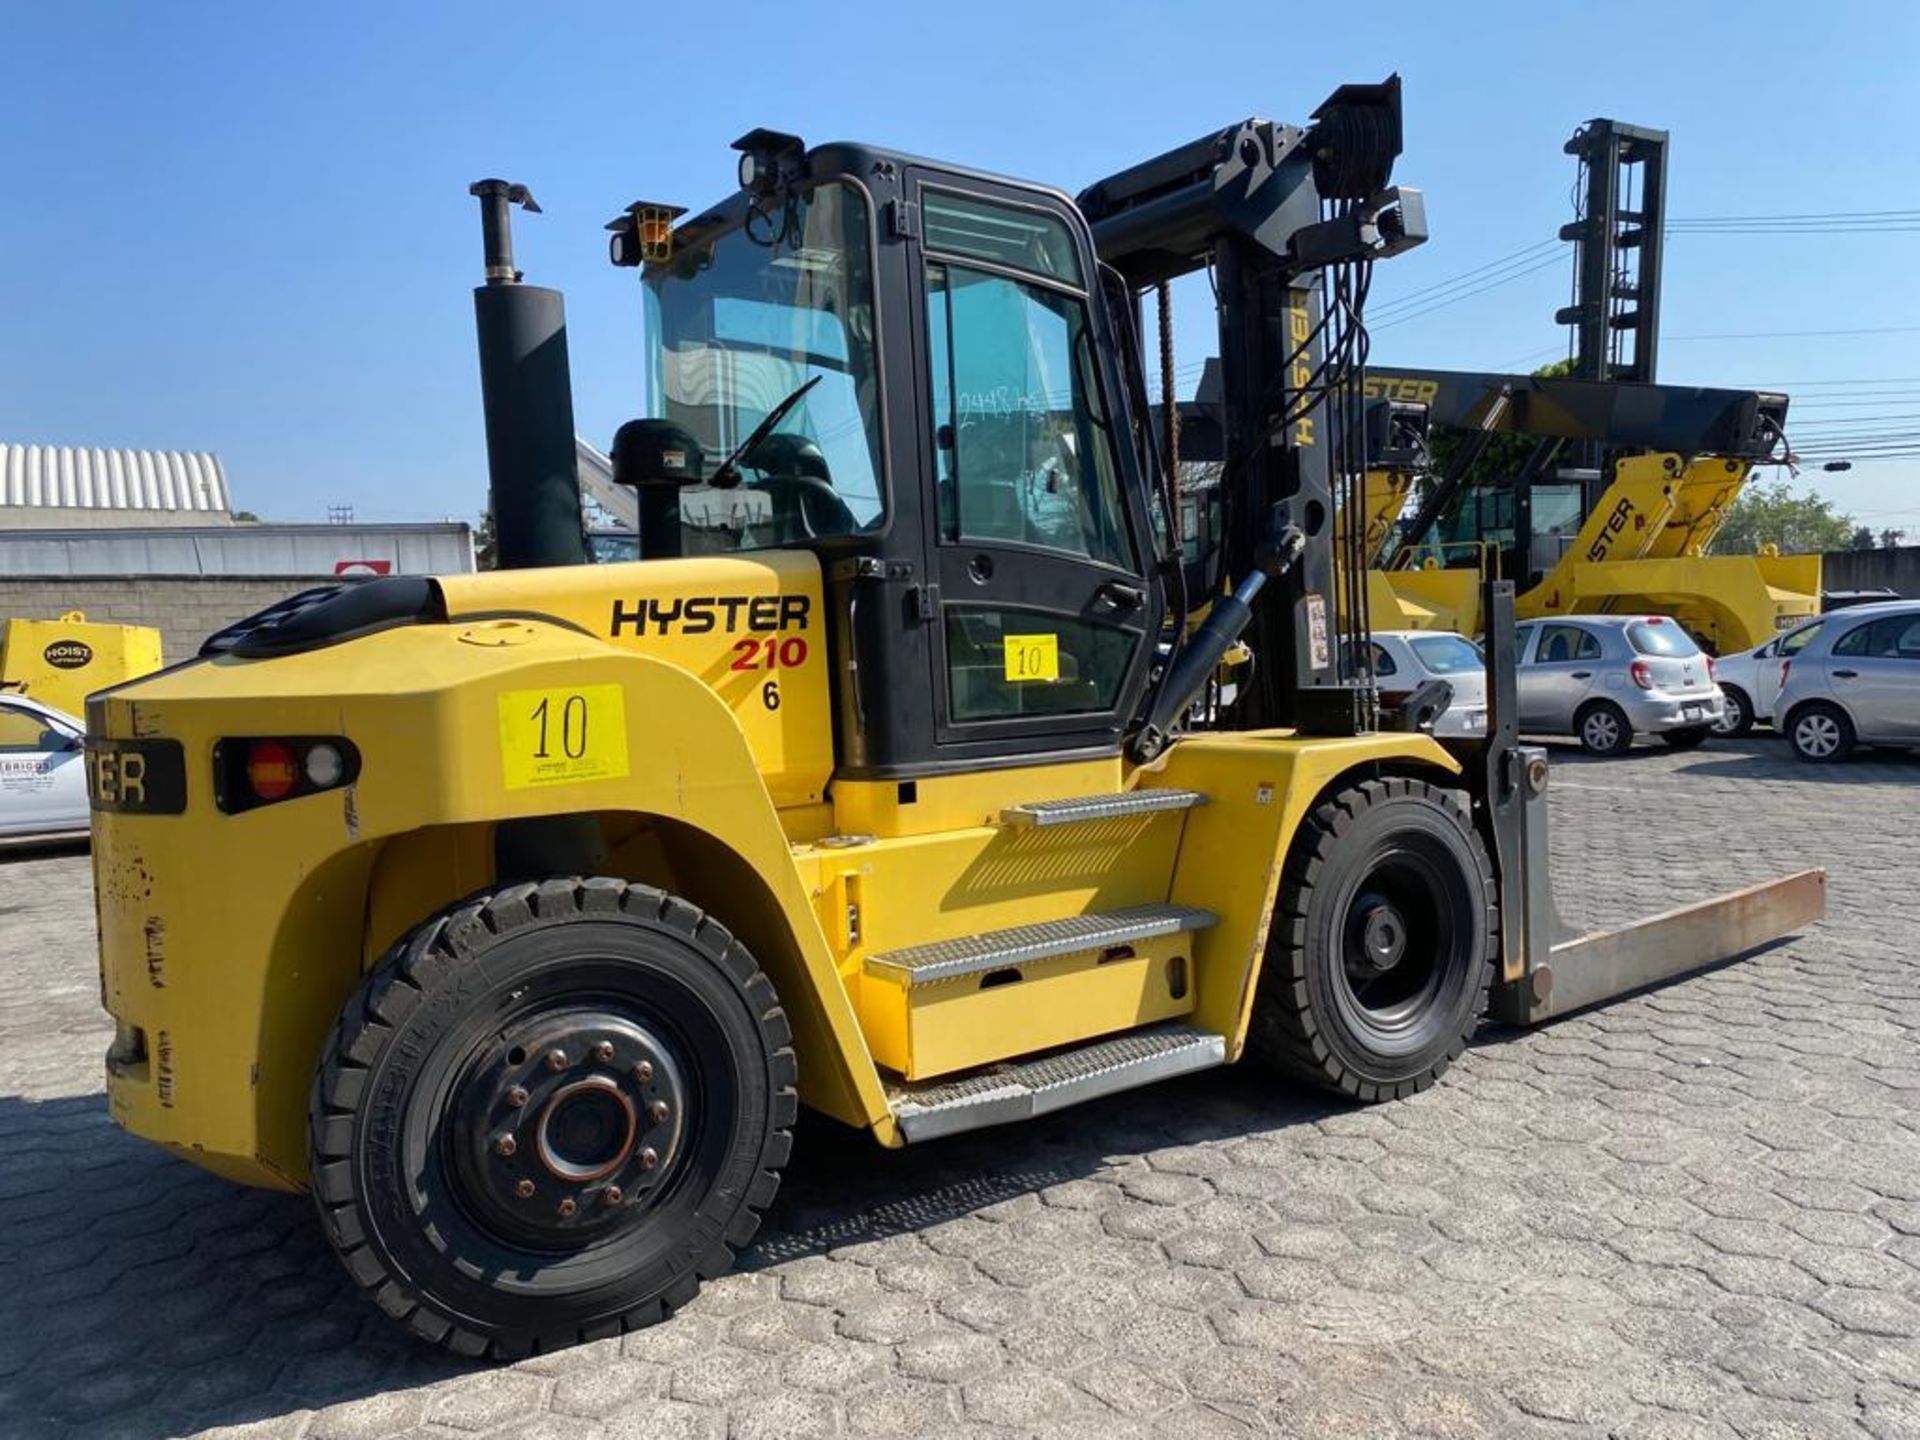 Hyster Forklift, model H210HD2, year 2017, 19,100 lb capacity, 2450 hours - Image 15 of 131